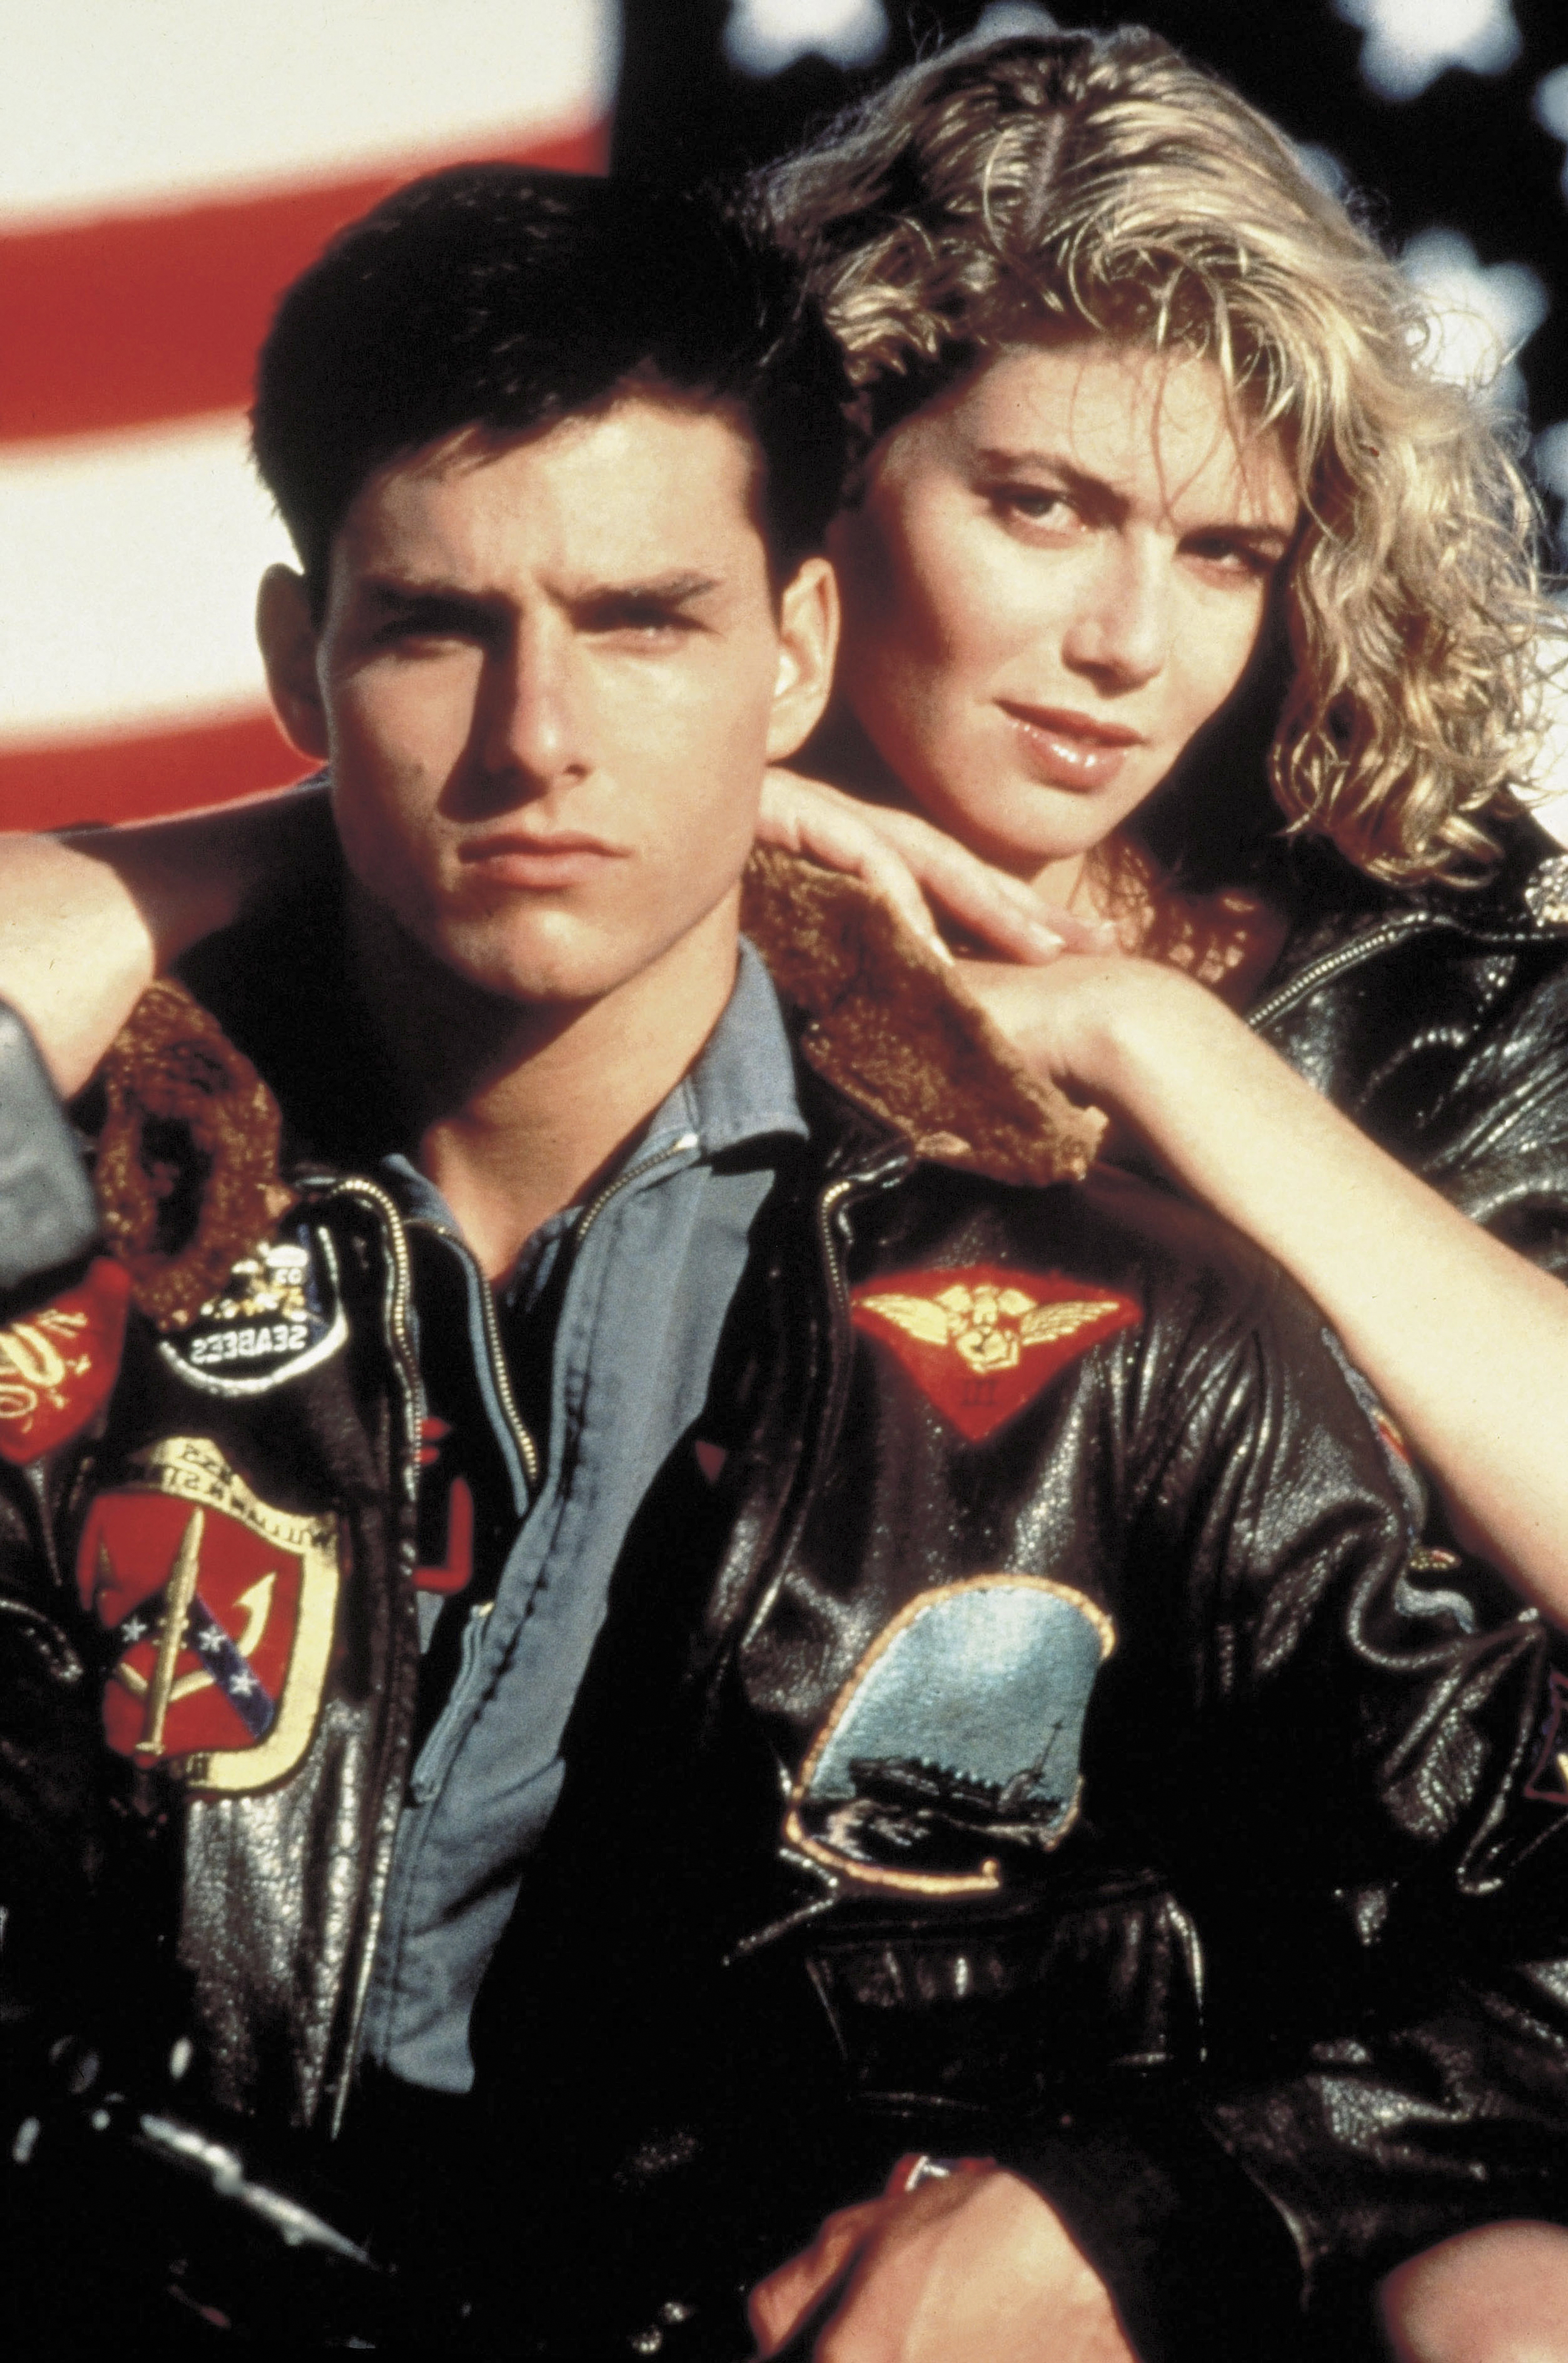 Tom Cruise and Kelly McGillis on the set of "Top Gun" in 1986 | Source: Getty Images